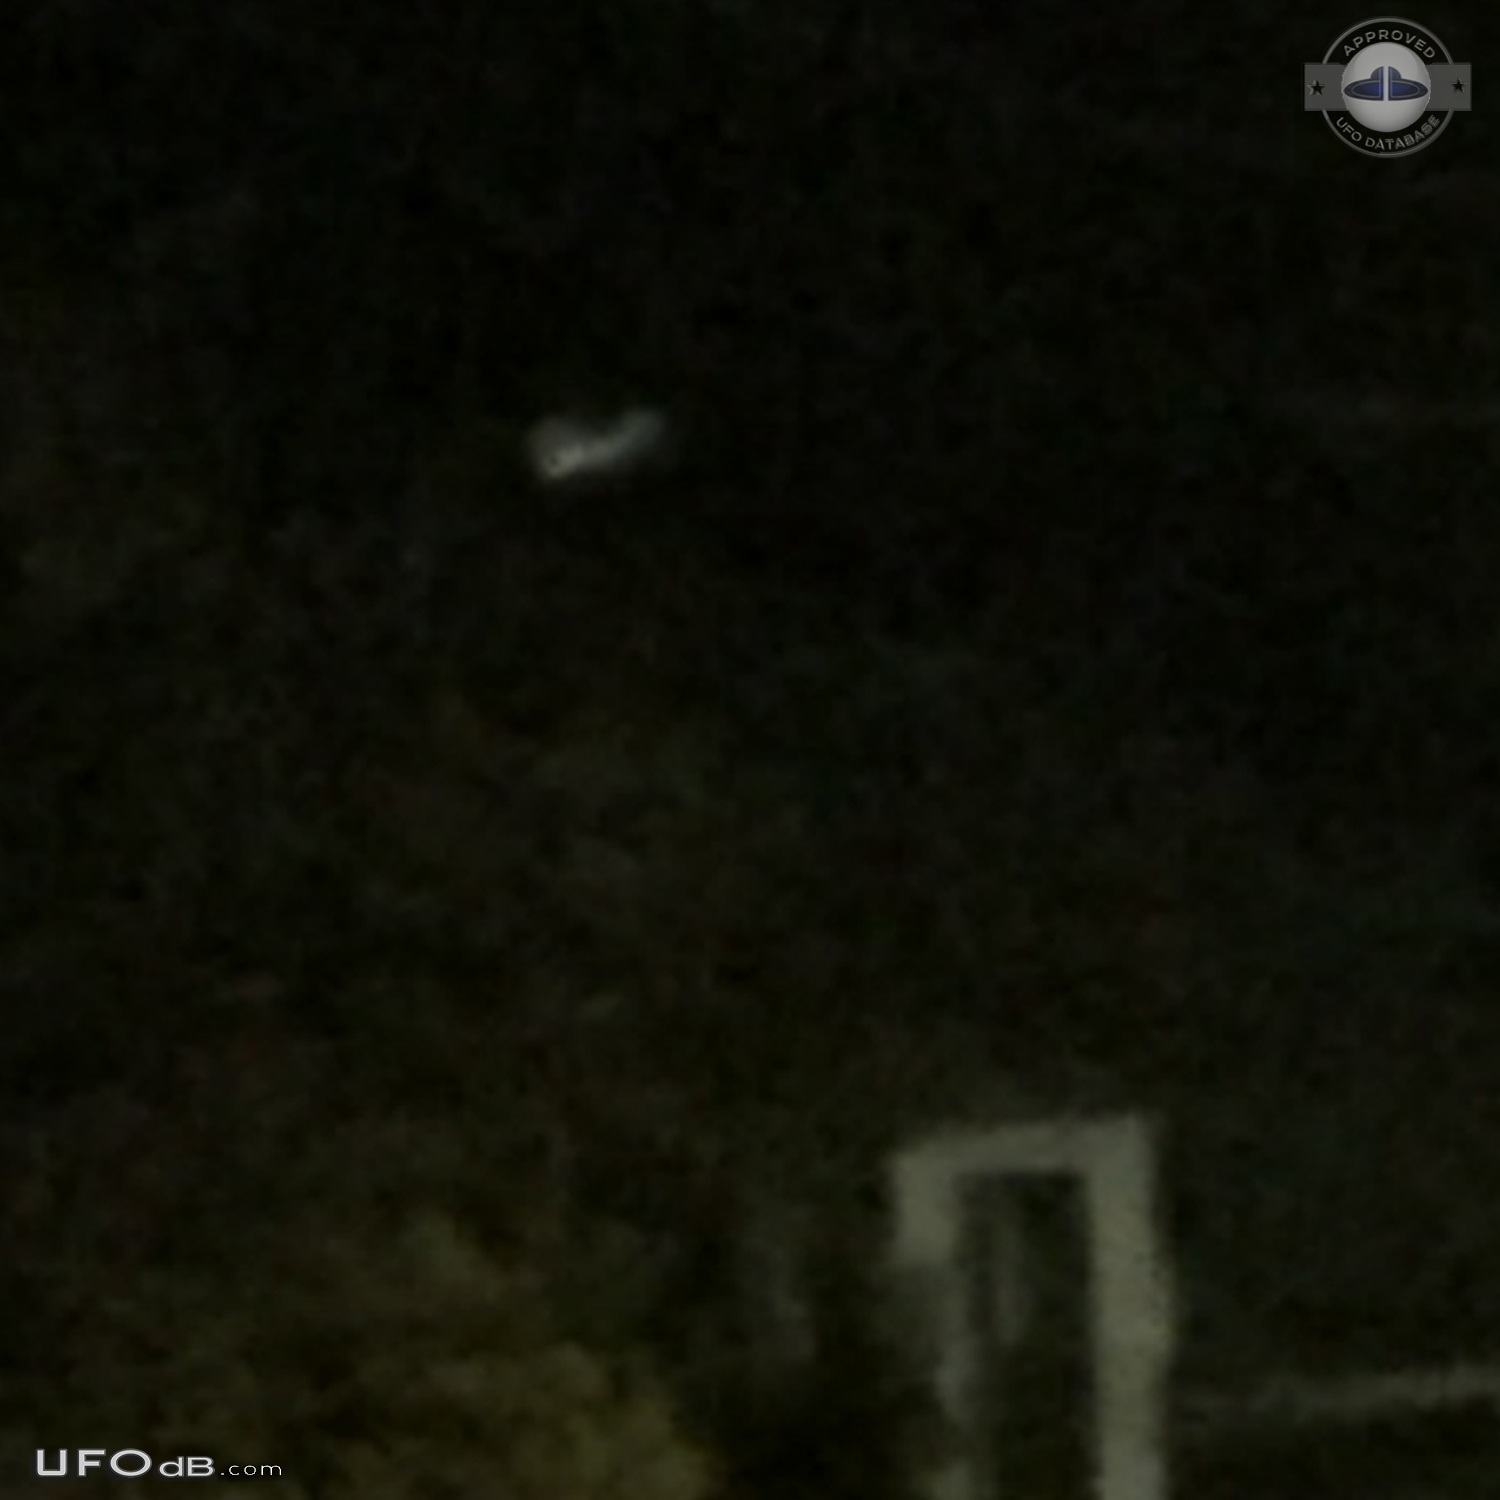 Looked like mothership with smaller glowing craft flying around it in  UFO Picture #708-3